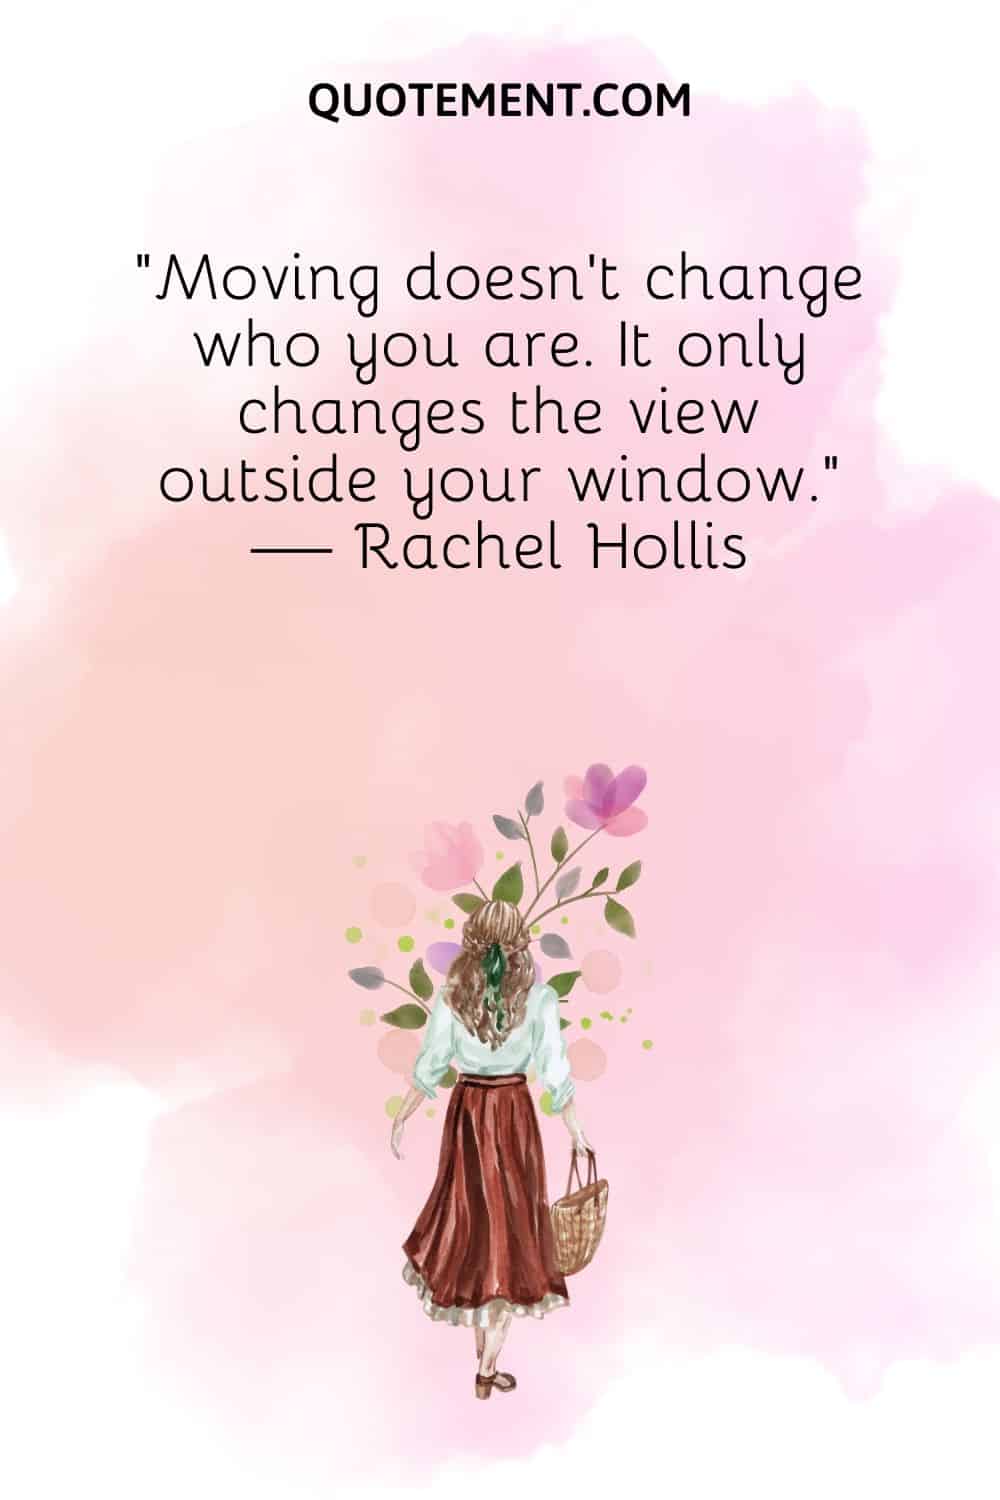 Moving doesn’t change who you are. It only changes the view outside your window